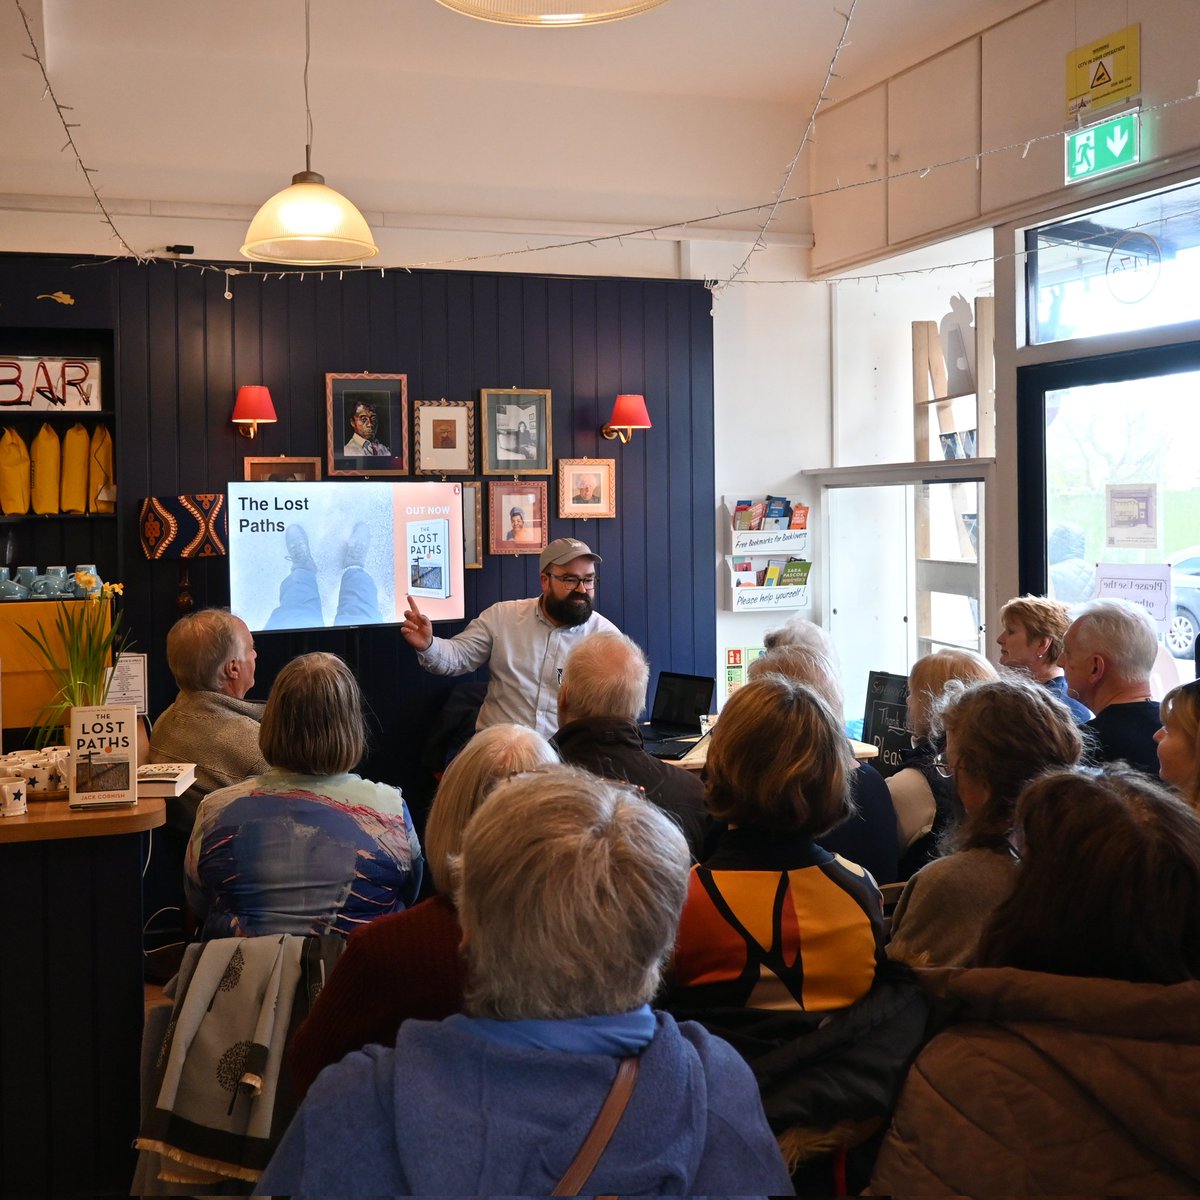 Yesterday, was my first two events for The Lost Paths. I had a great time @7OaksBookshop & @CWBookshop - thank you! More events in April in the thread below - in Oxford, Brixton and Dulwich 🧵